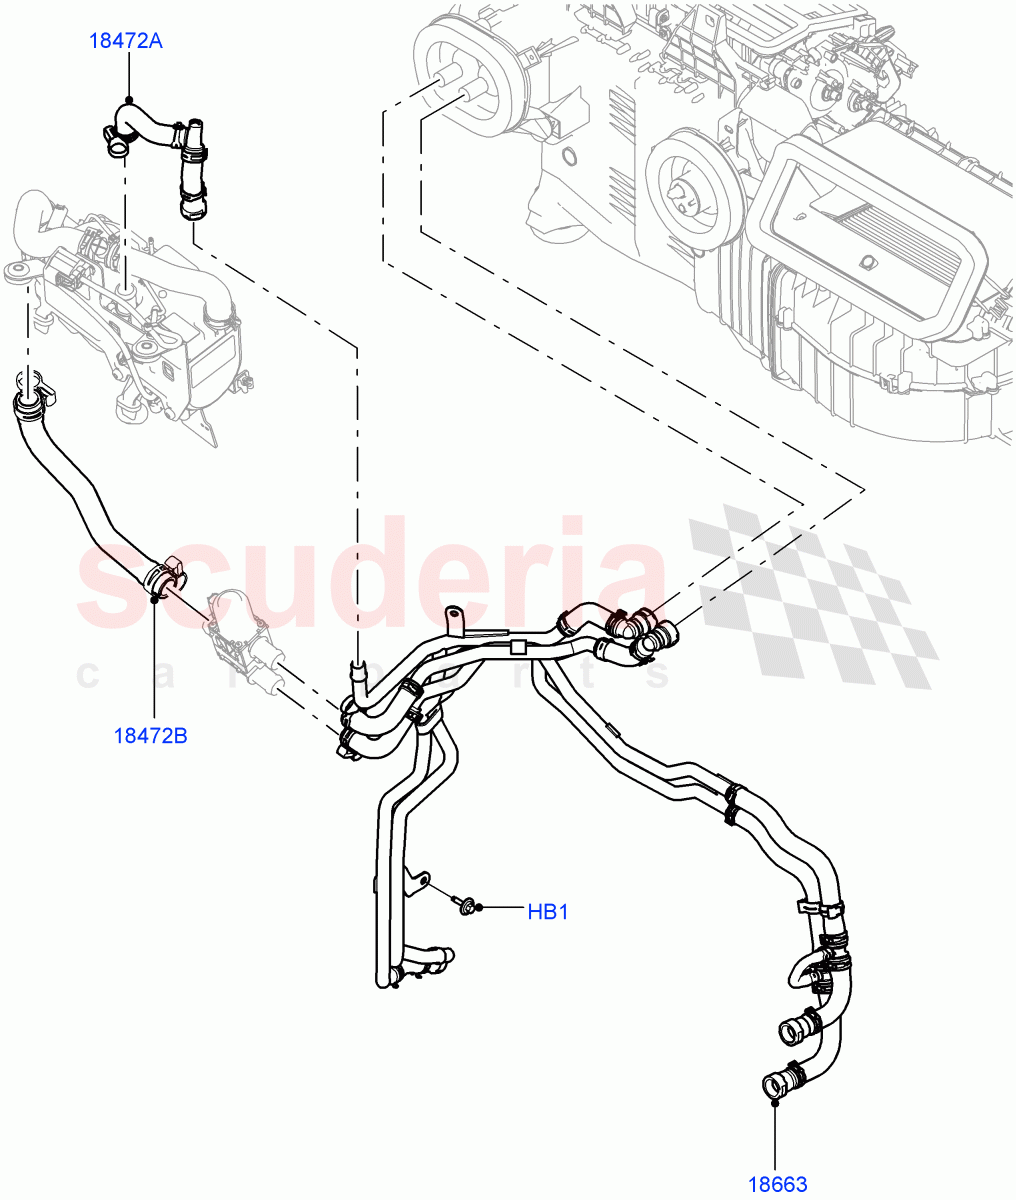 Heater Hoses(Solihull Plant Build)(2.0L I4 DSL MID DOHC AJ200,With Fuel Fired Heater,With Air Conditioning - Front/Rear,Park Heating With Remote Control,2.0L I4 DSL HIGH DOHC AJ200)((V)FROMHA000001,(V)TOHA999999) of Land Rover Land Rover Discovery 5 (2017+) [2.0 Turbo Petrol AJ200P]